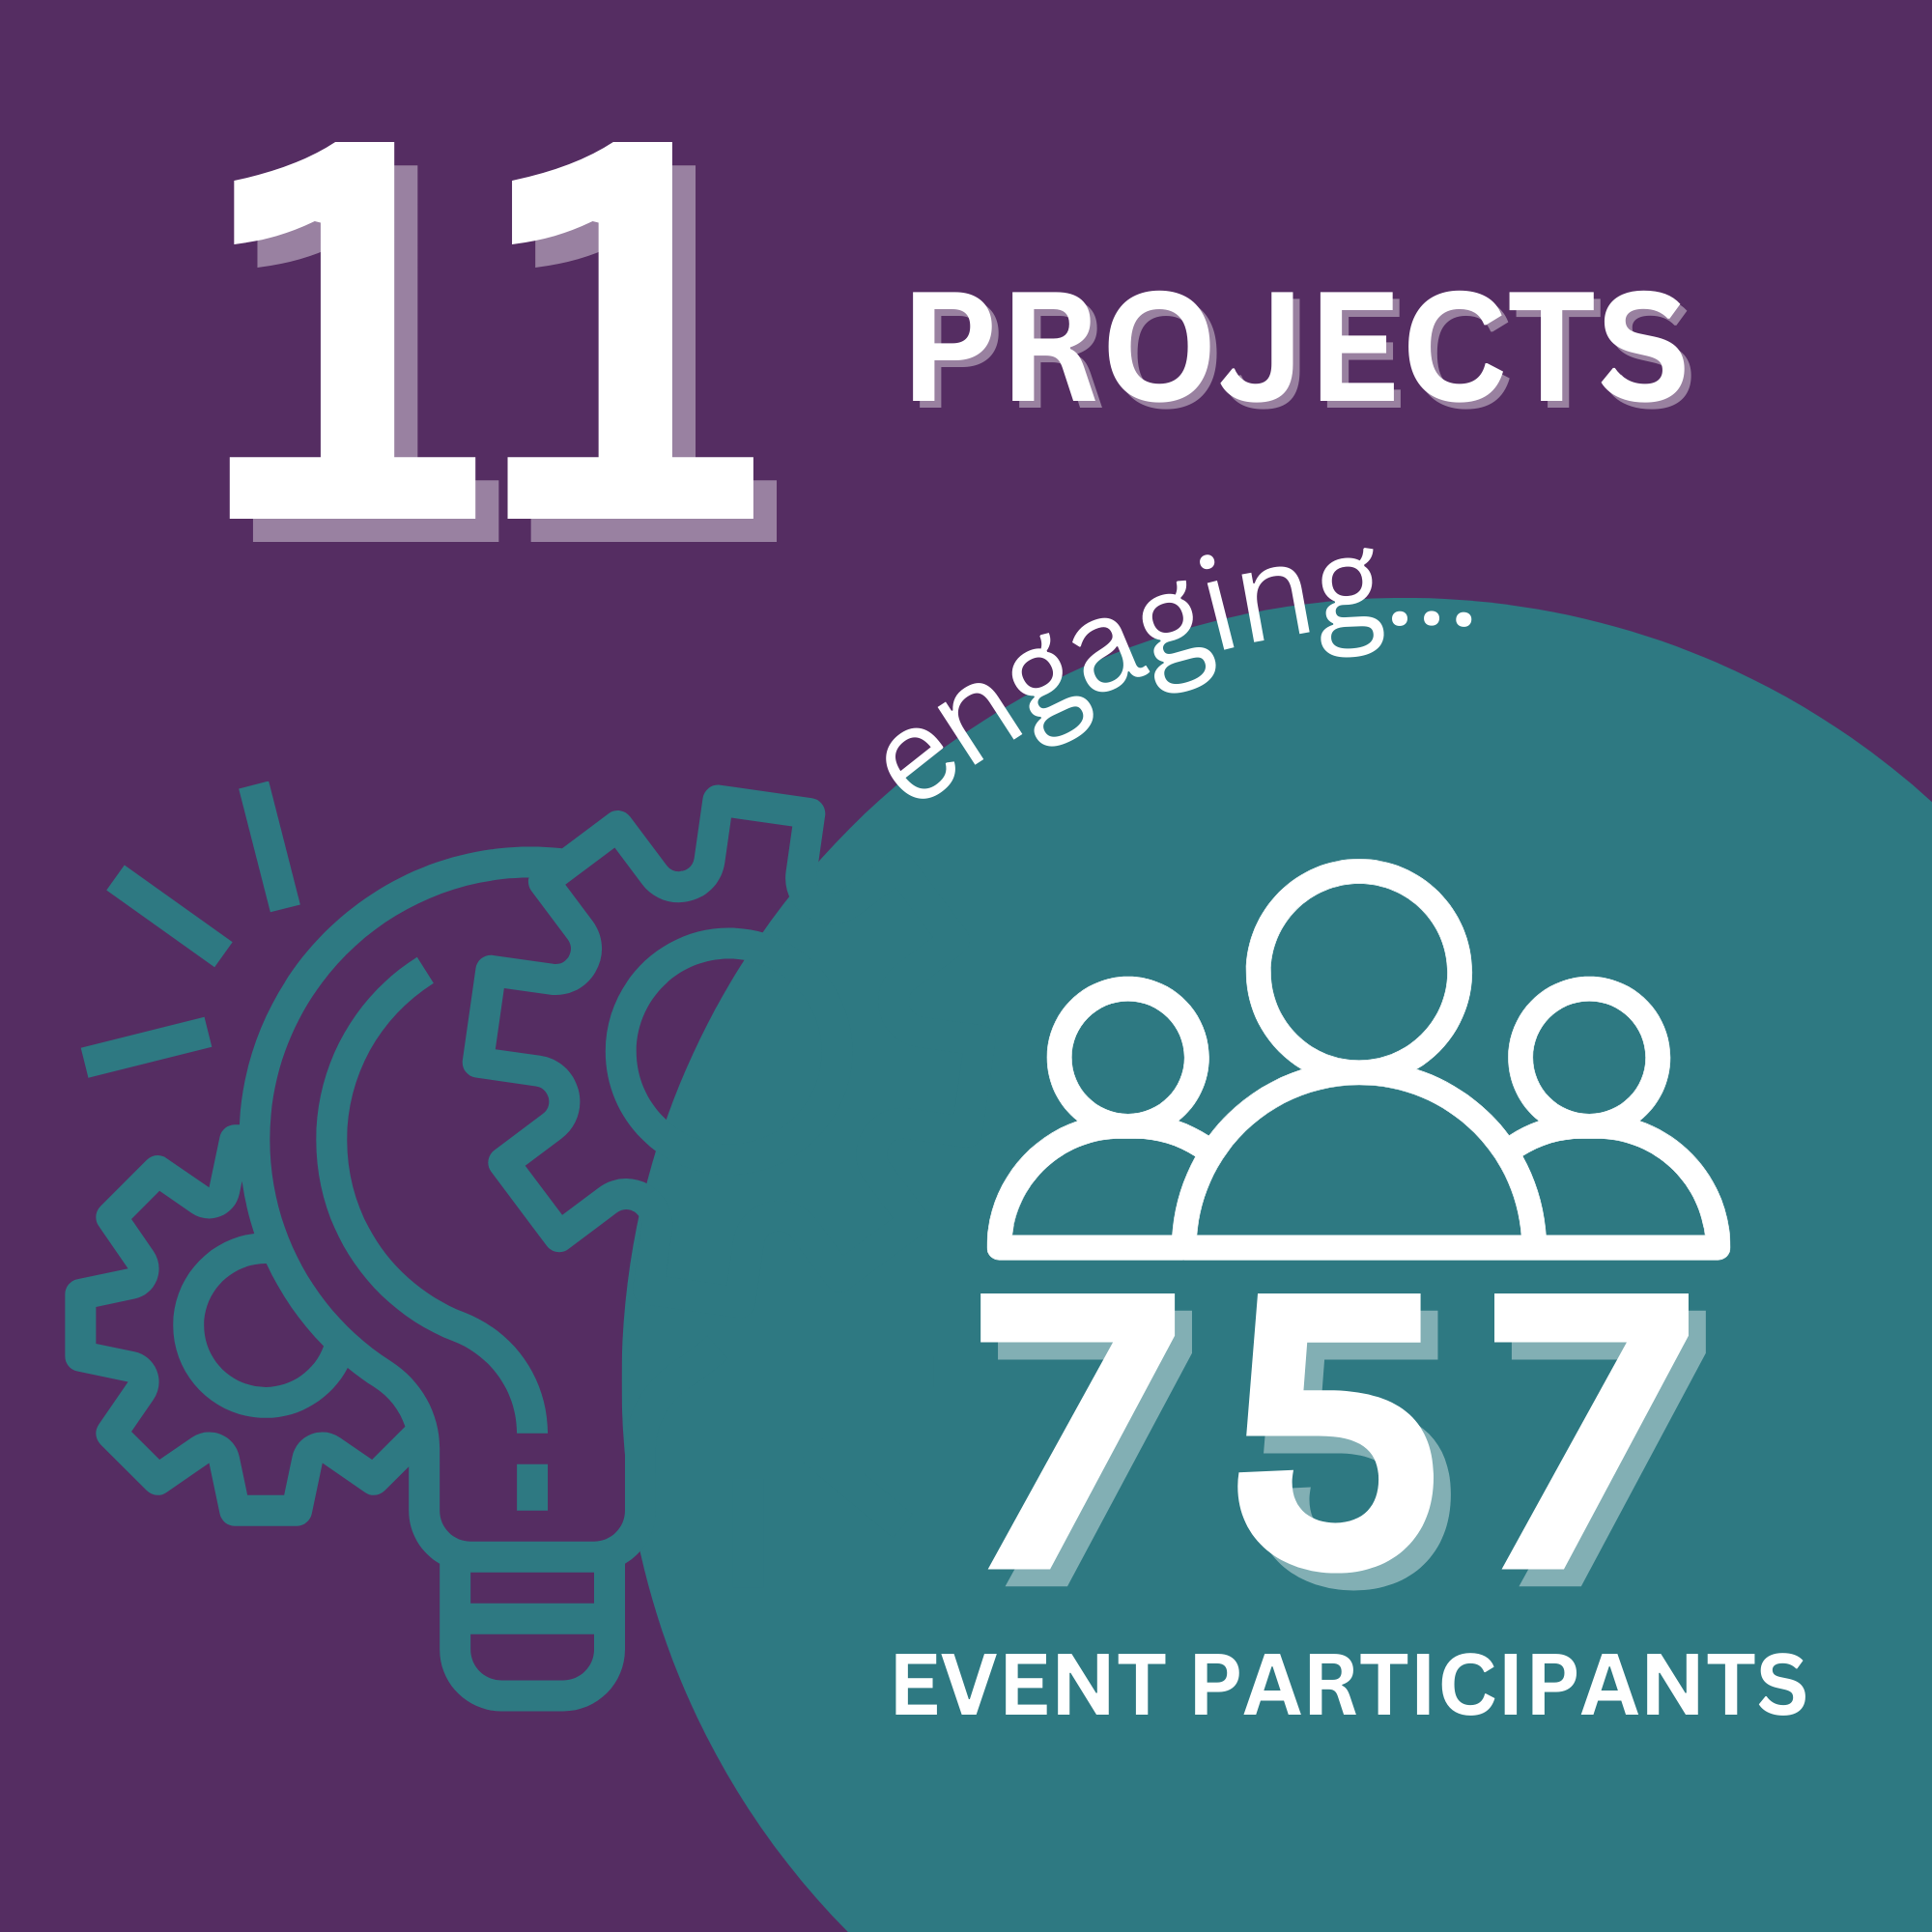 11 projects engaging 757 event participants